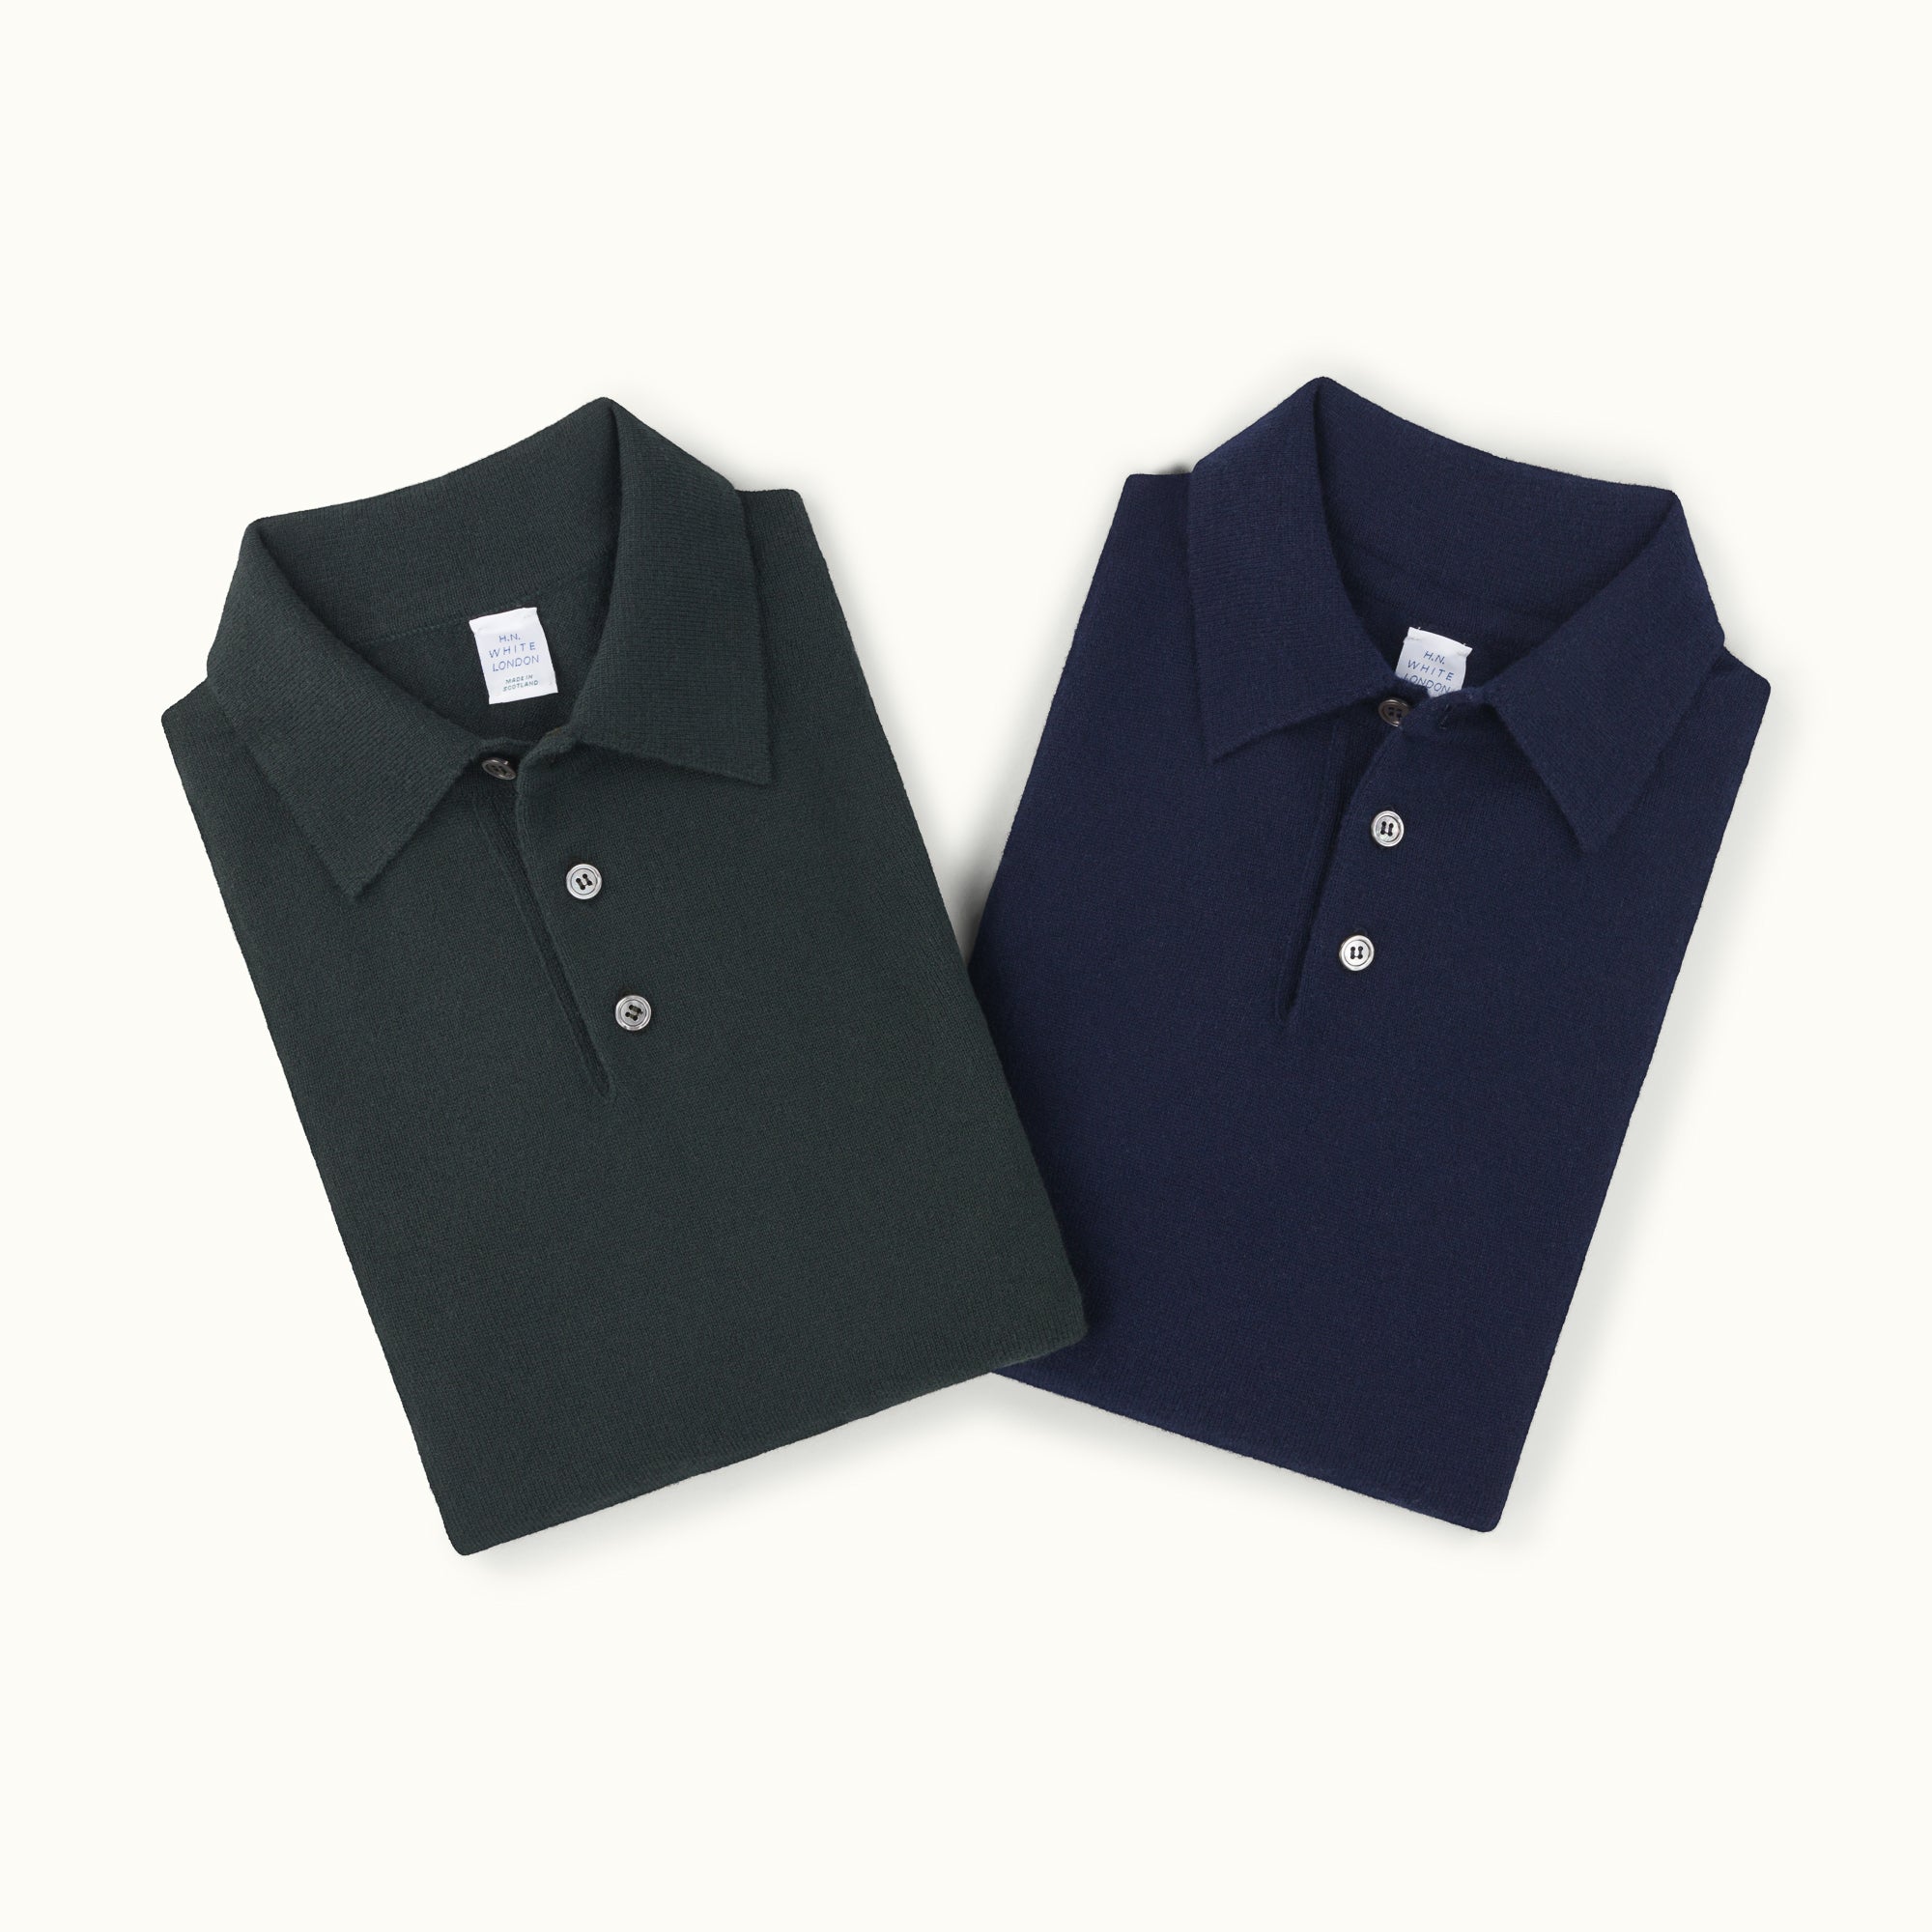 Navy Blue Cashmere Knitted Polo